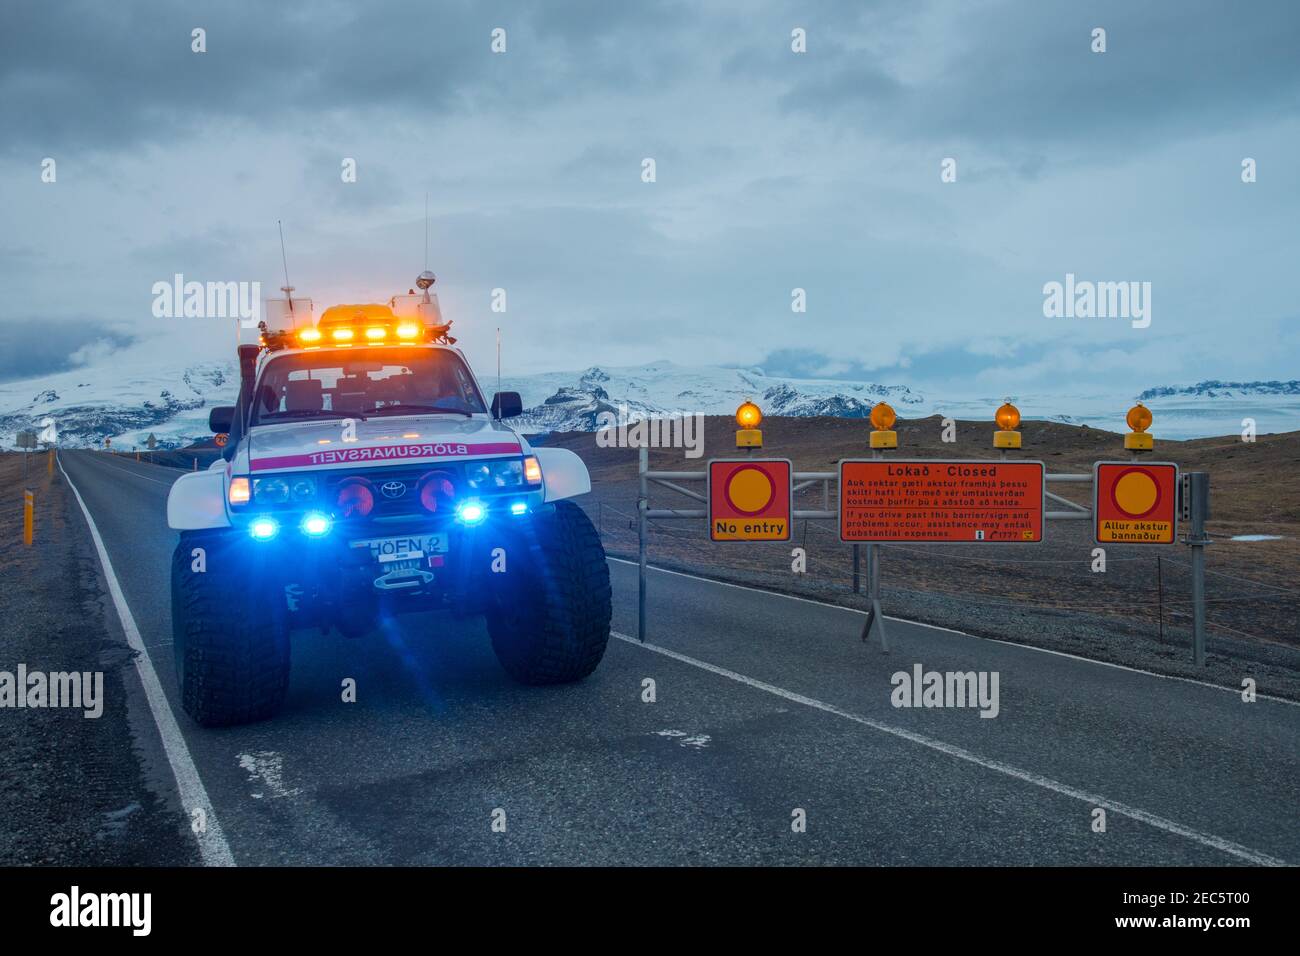 Jokulsarlon Iceland - December 21. 2019: heavily modified search and rescue Toyota Landcruiser 4x4 truck closing the road Stock Photo